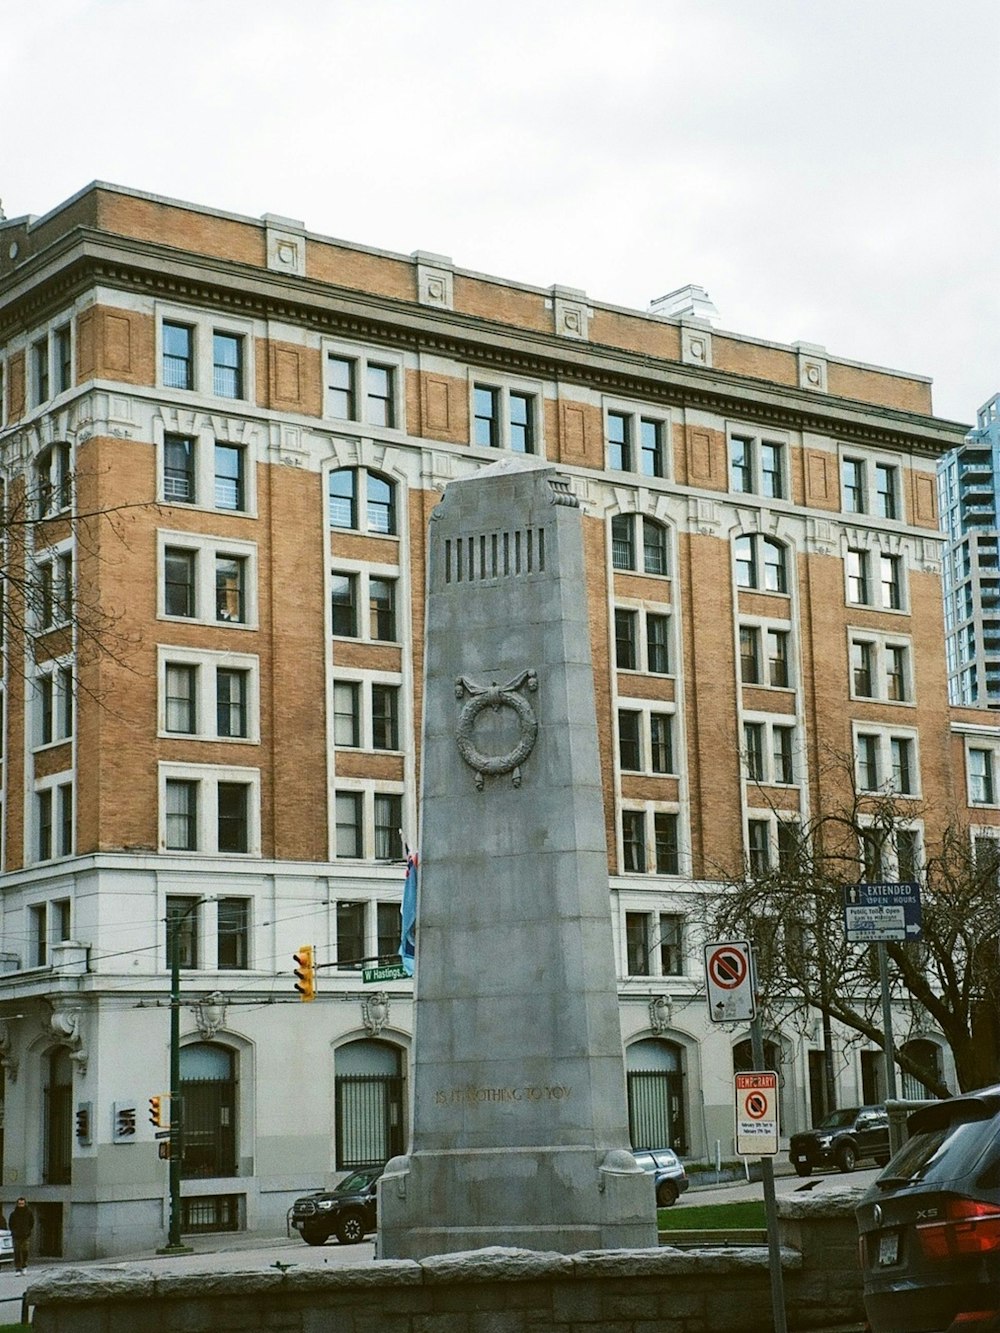 a monument in front of a building with a clock on it